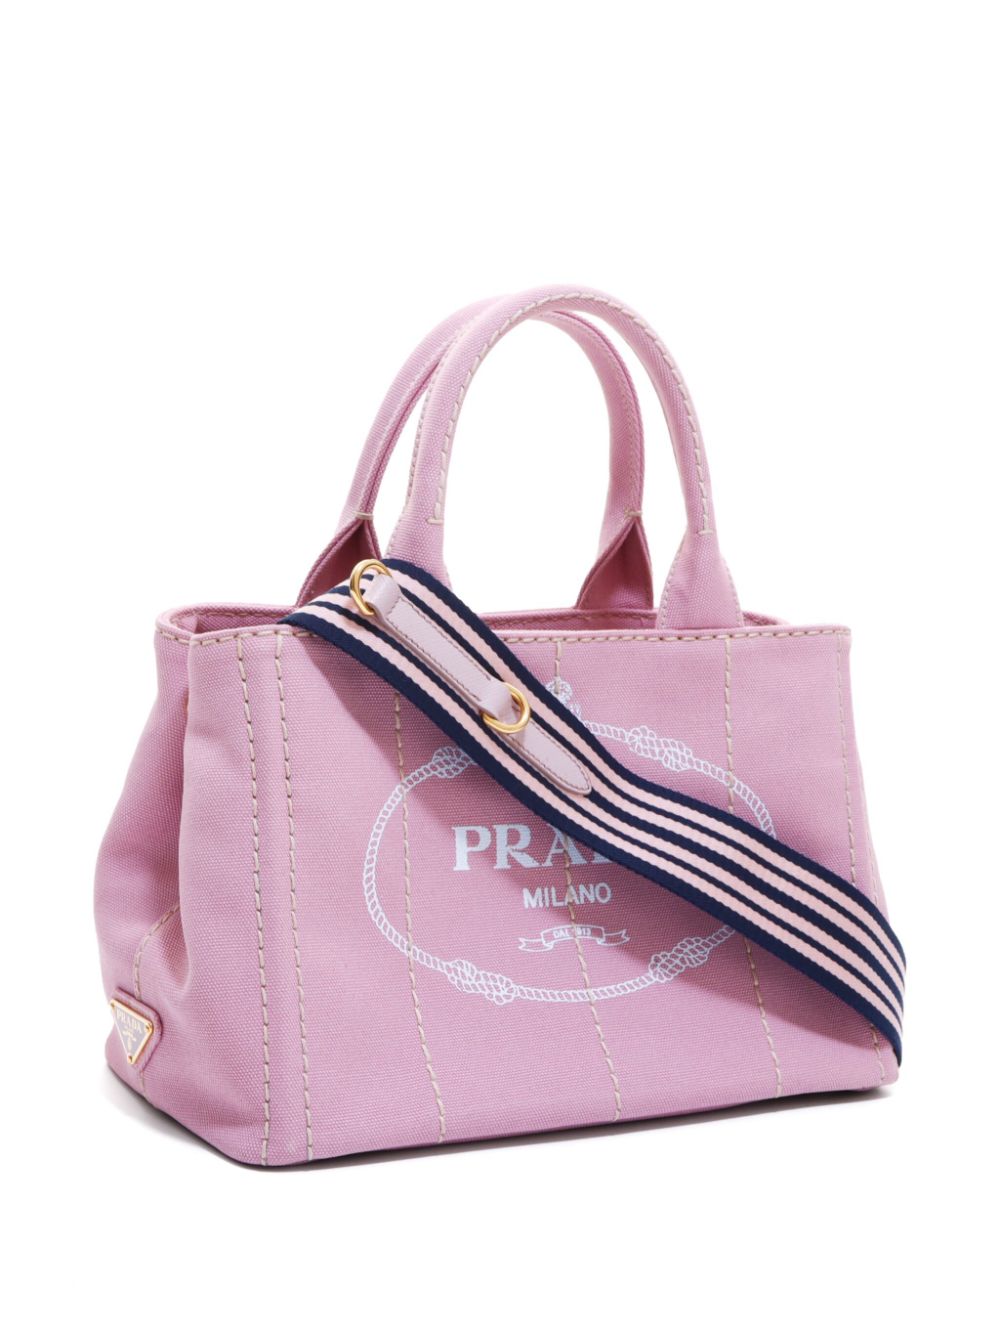 Pre-owned Prada Canapa Canvas Tote Bag In Pink